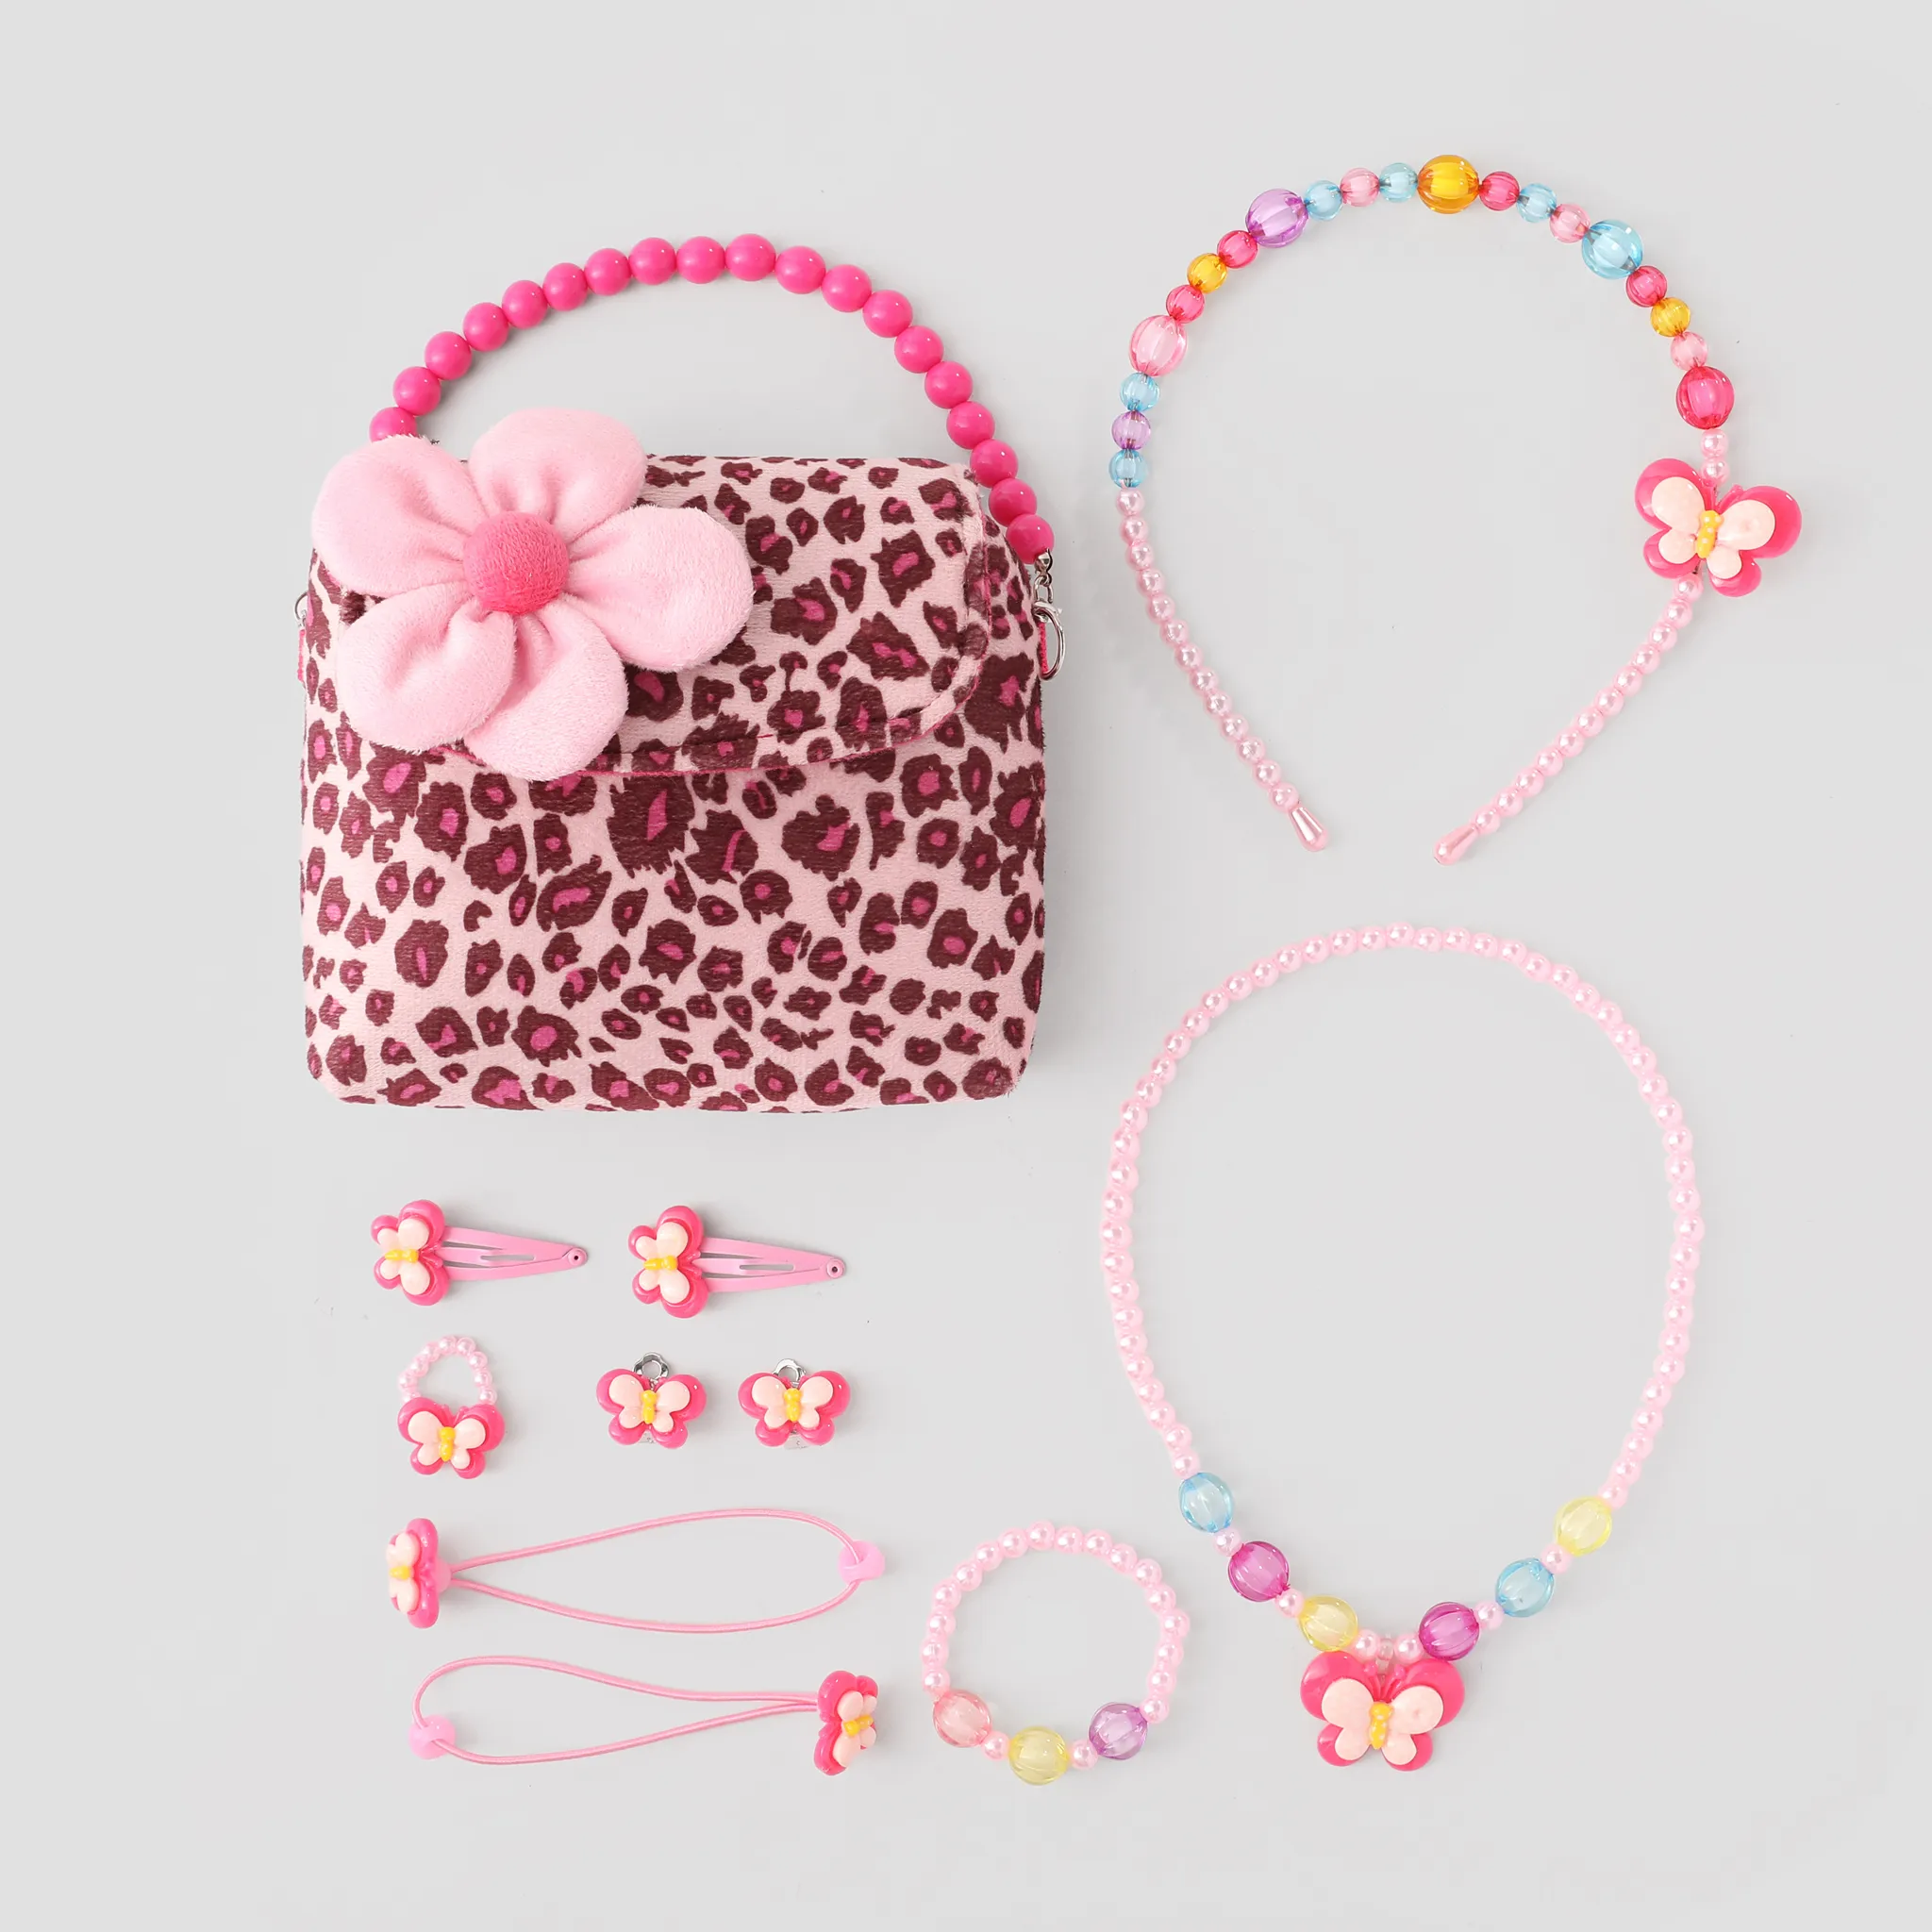 11 Pieces, Three-dimensional Flower Children's Bag And Hair Accessories Exquisite Set